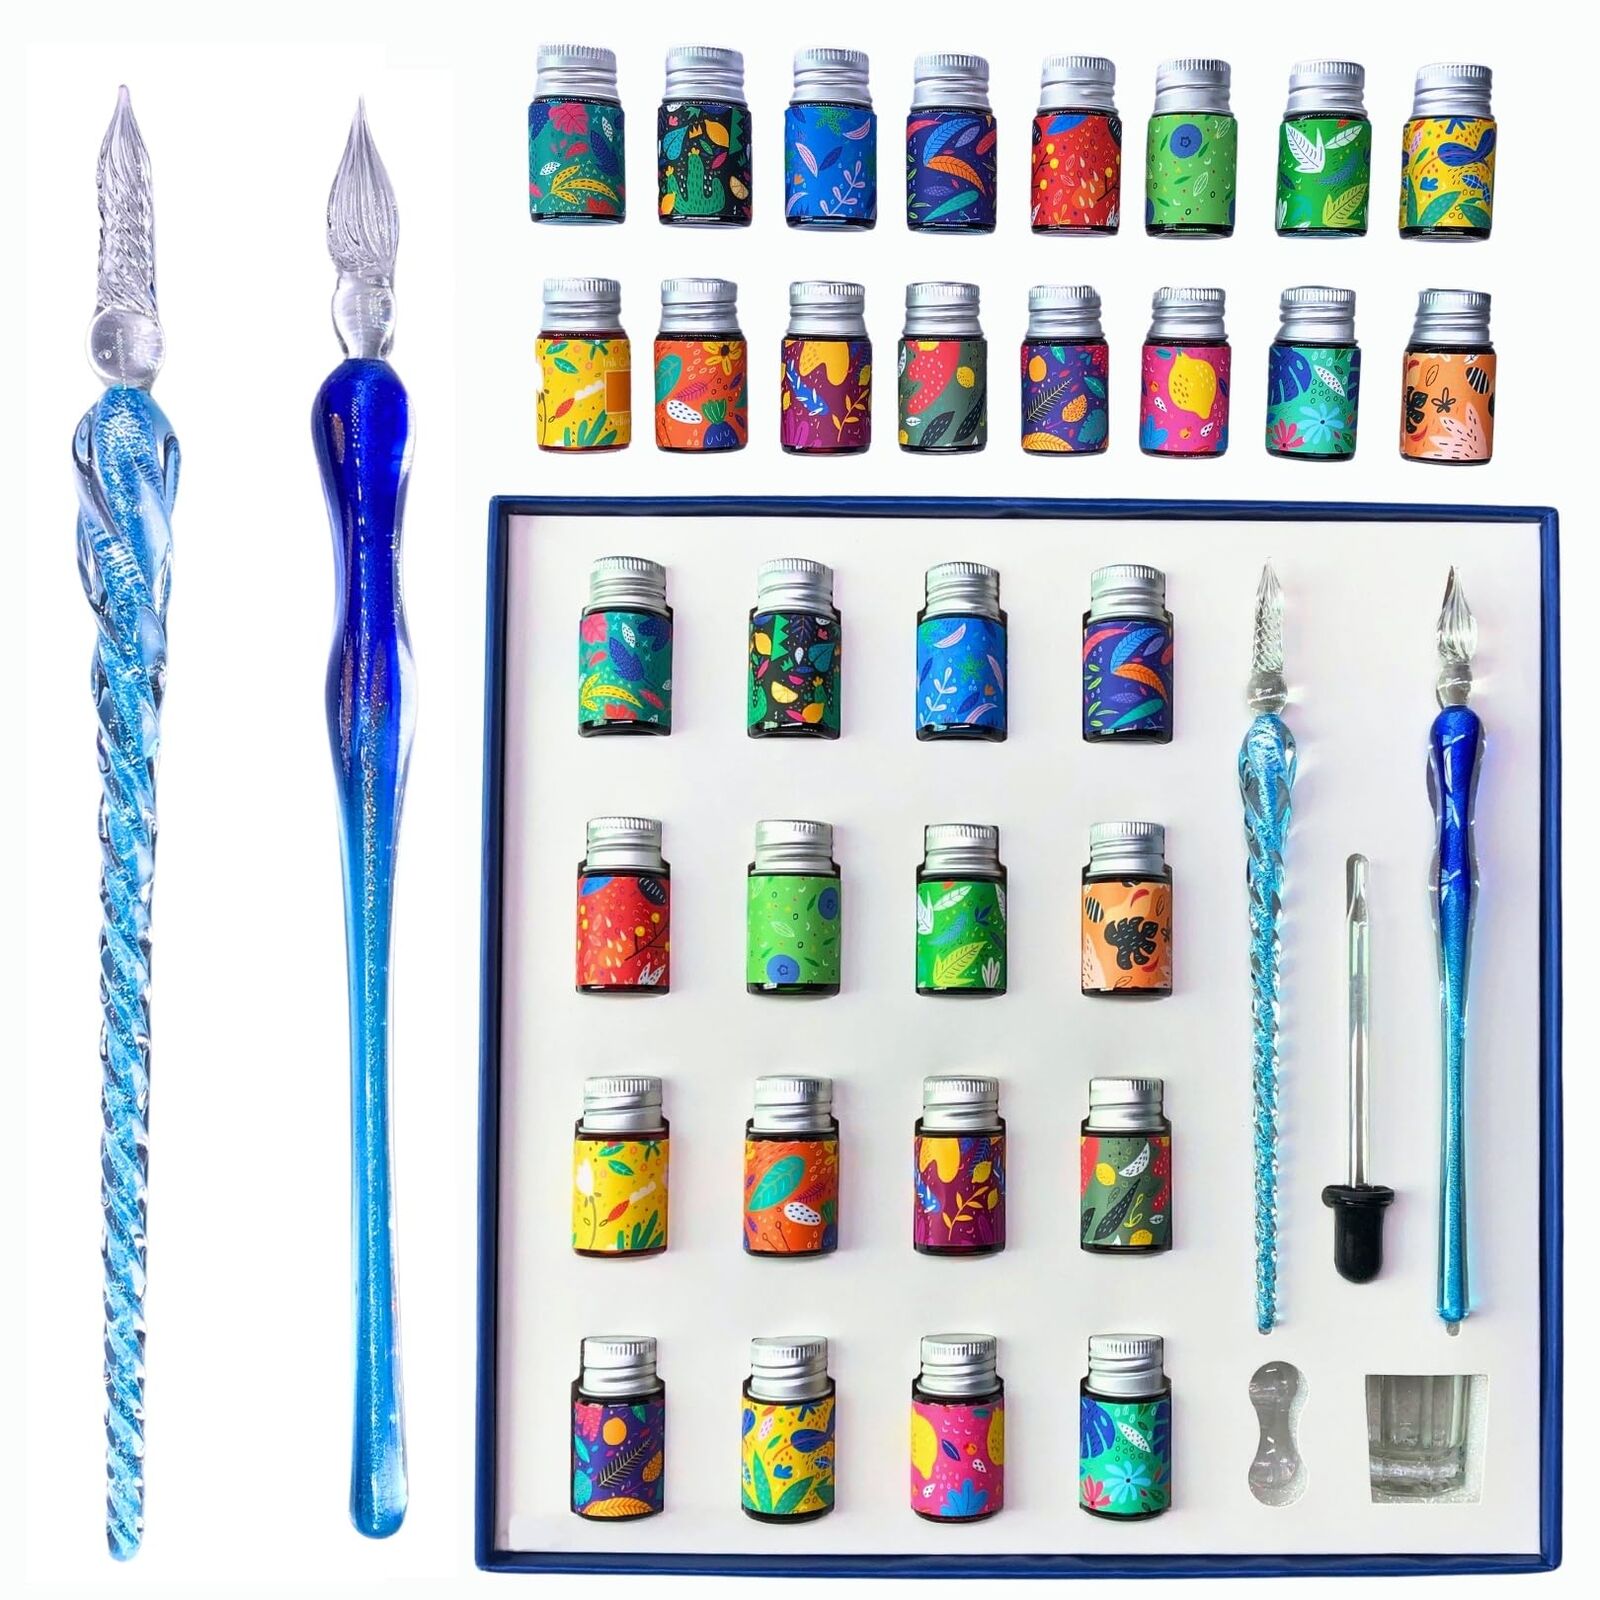 Premium Glass Pen Set, 21 Pieces - Calligraphy and Drawing Pen Set, Includes ...